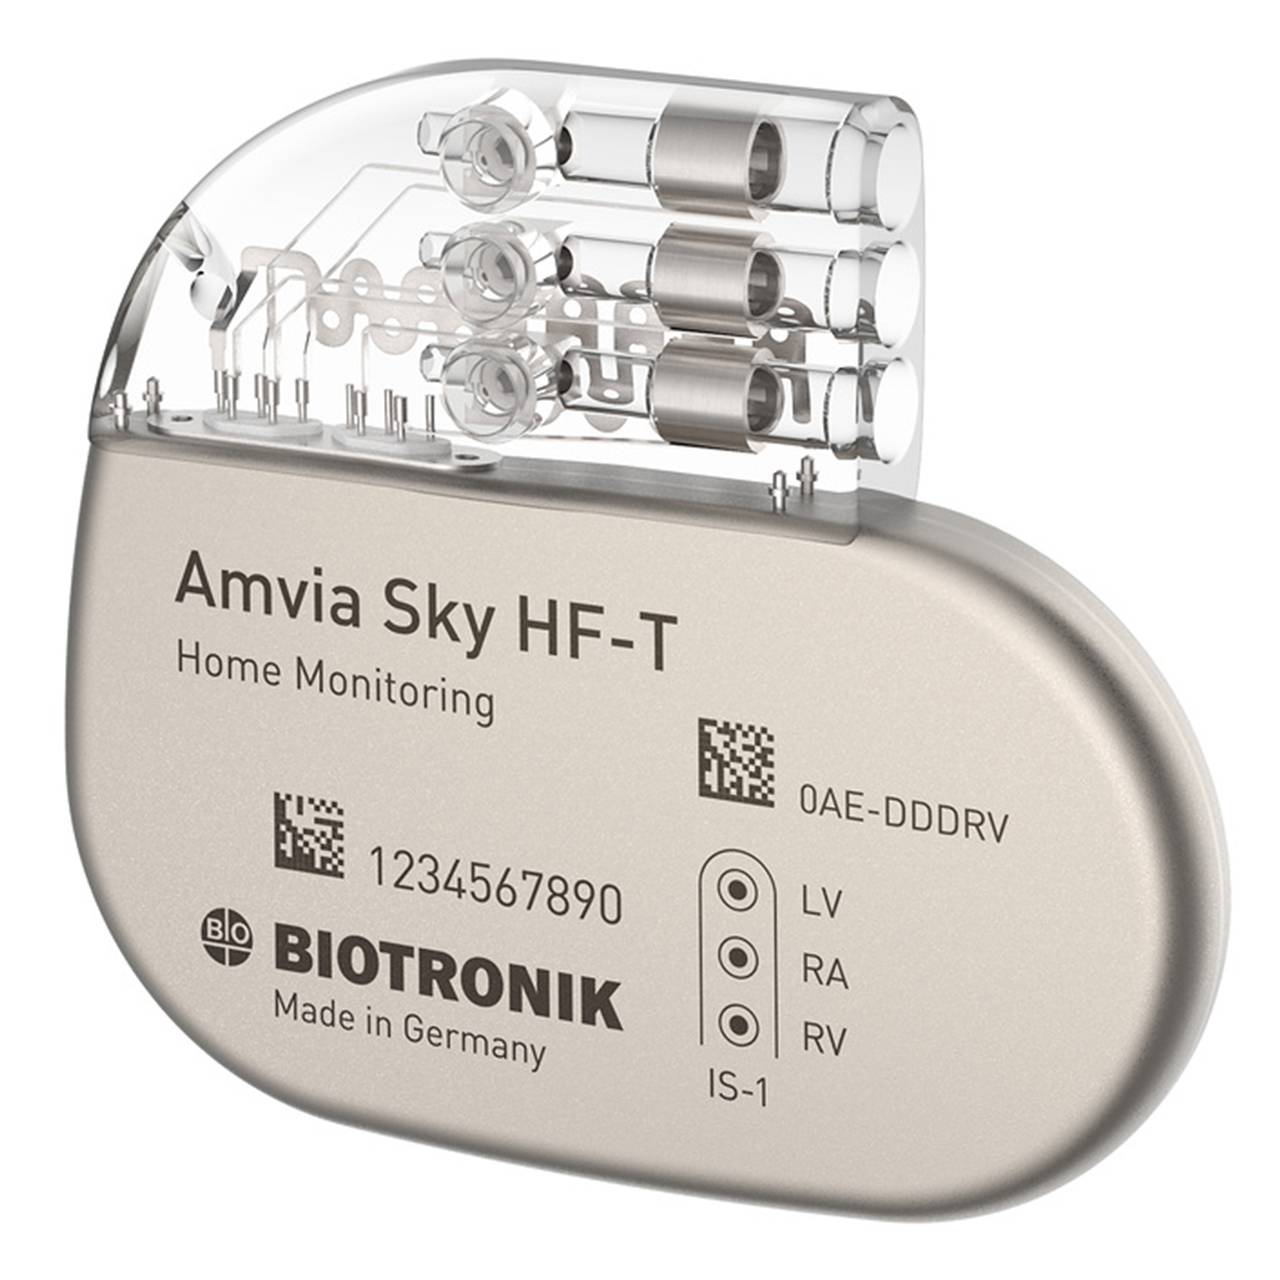 Amvia Sky HF-T CRT Pacemaker, at an angle